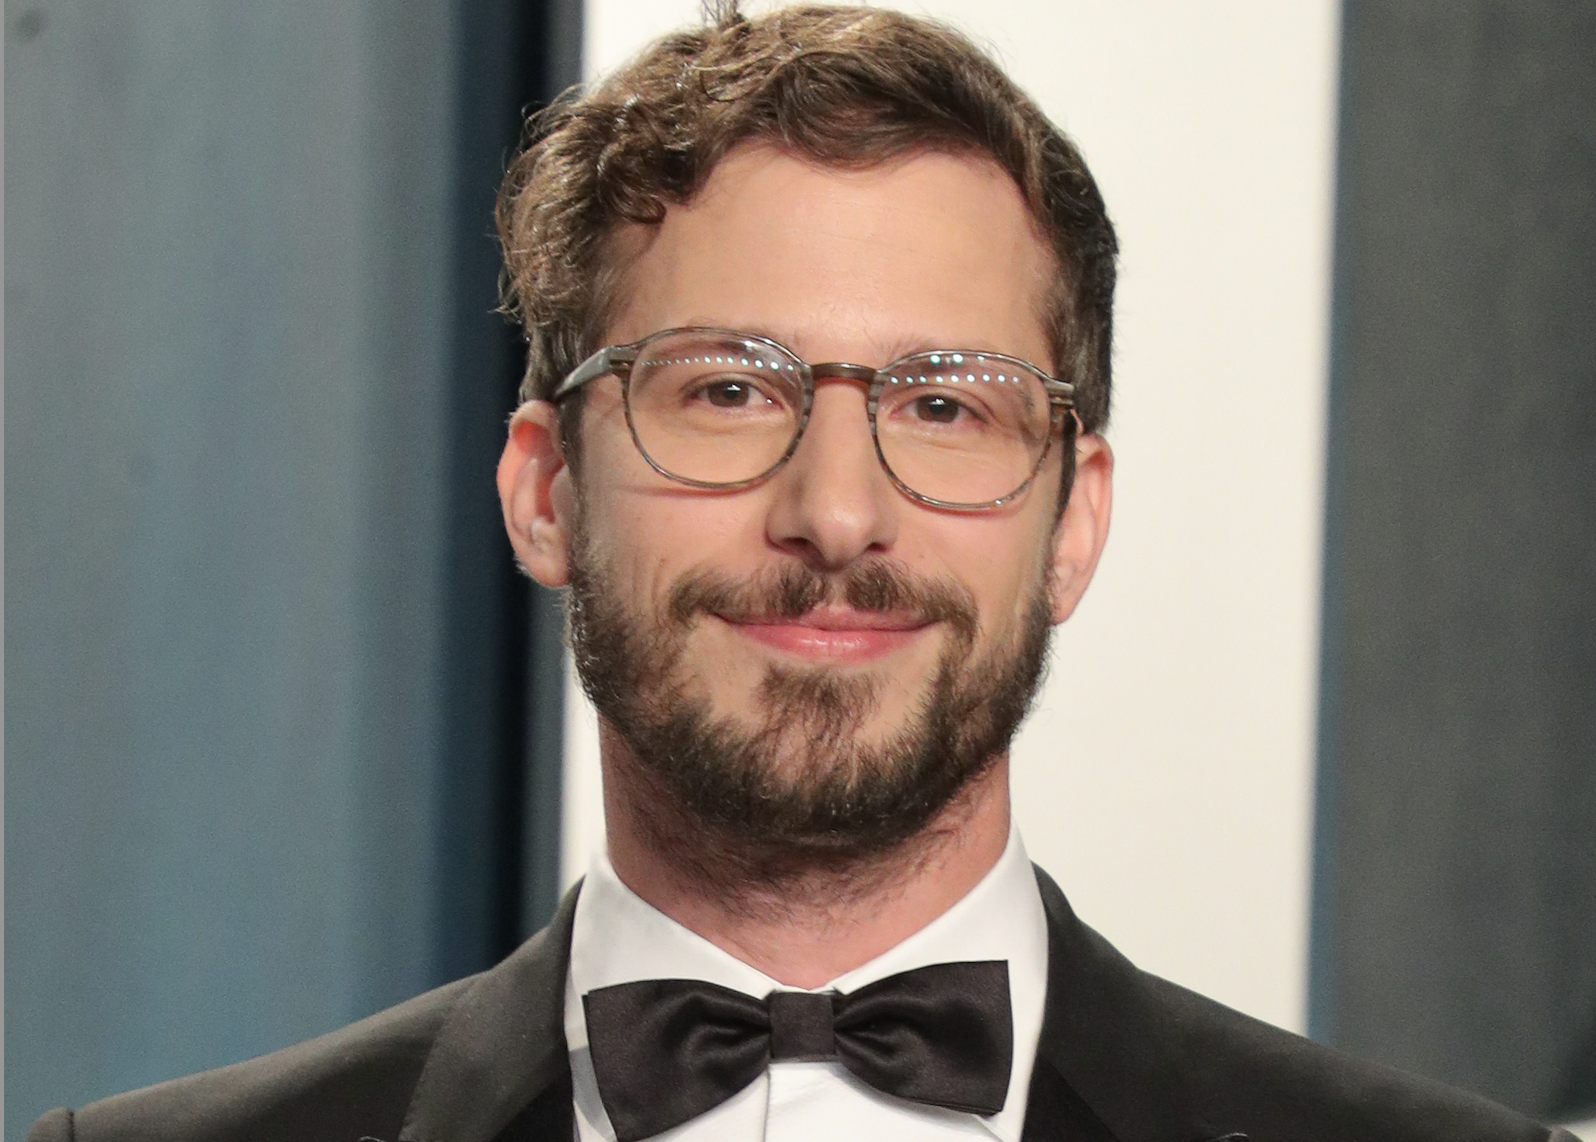 Andy Samberg Says ‘SNL’ Took a ‘Heavy Toll’ and He Exited Because Life Was Falling Apart: ‘I Hadn’t Slept in Seven Years’ and...